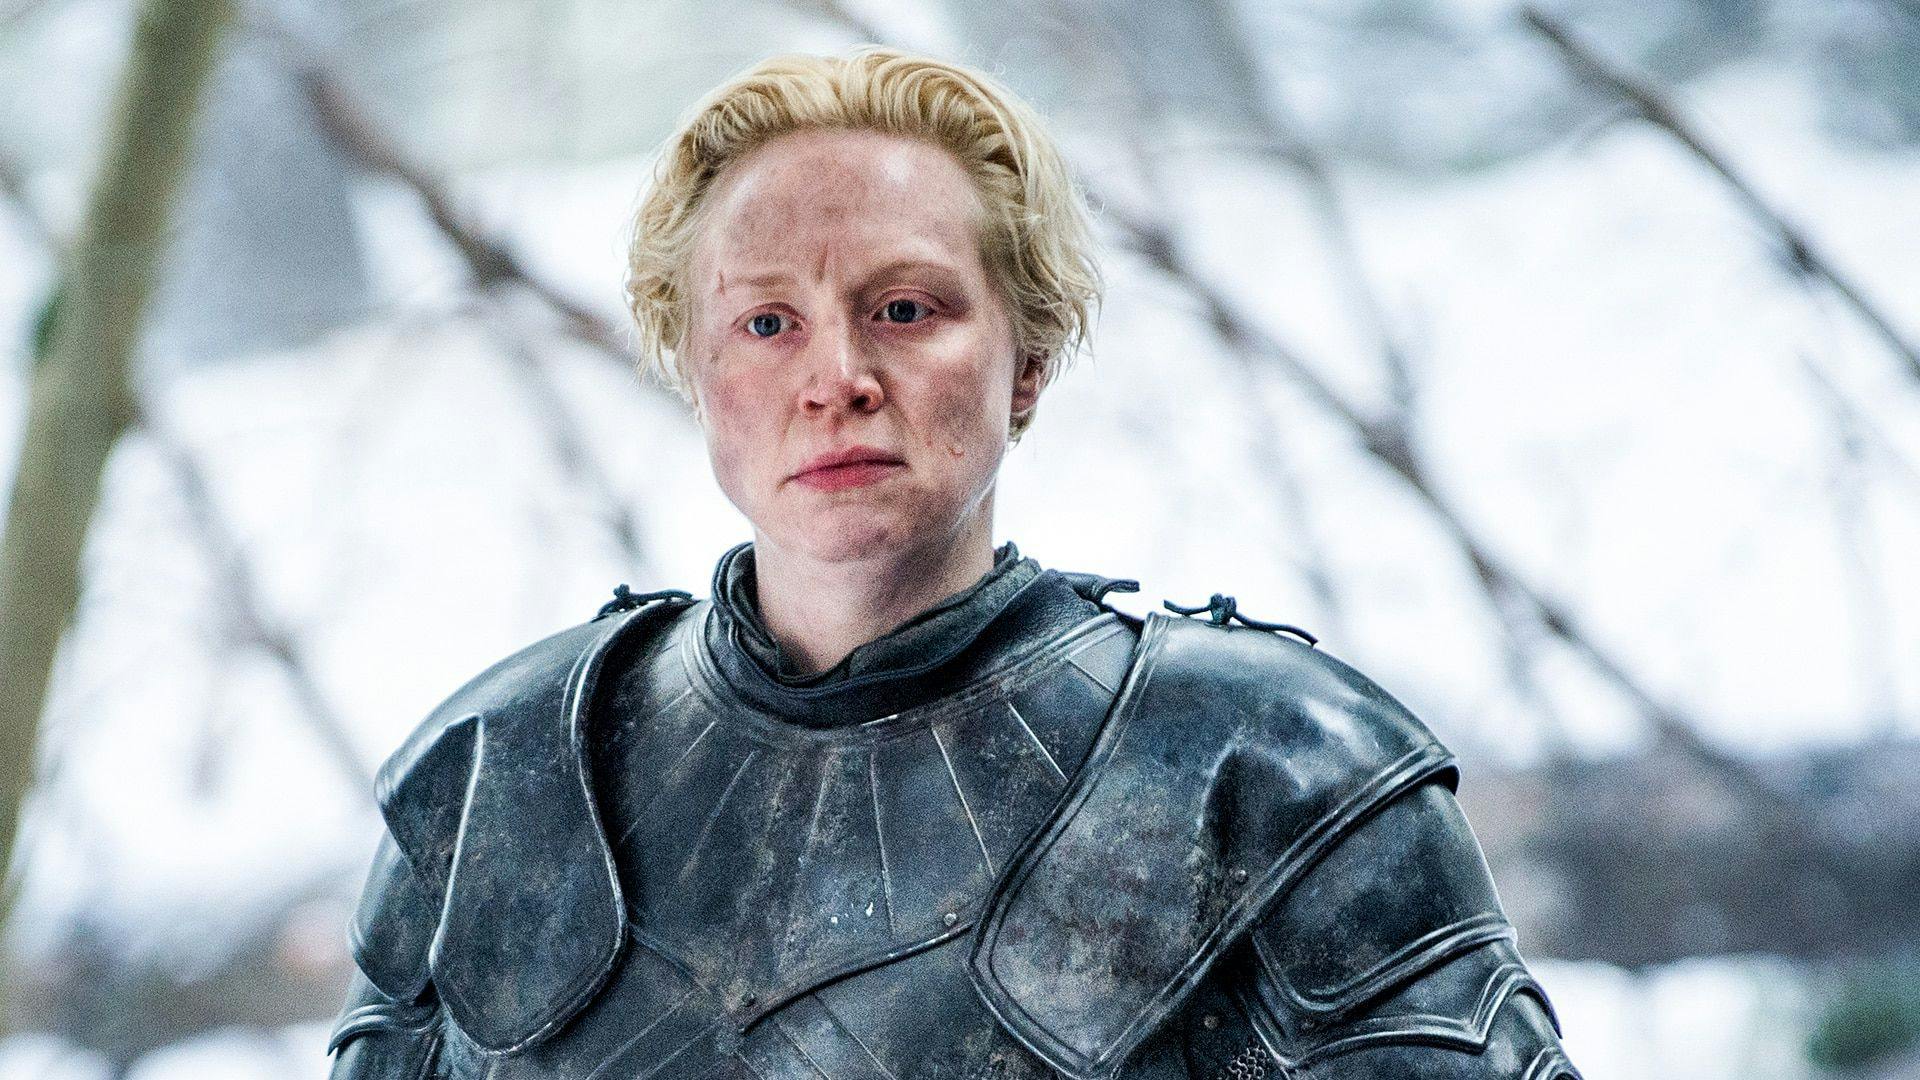 Brienne of Tarth personality type